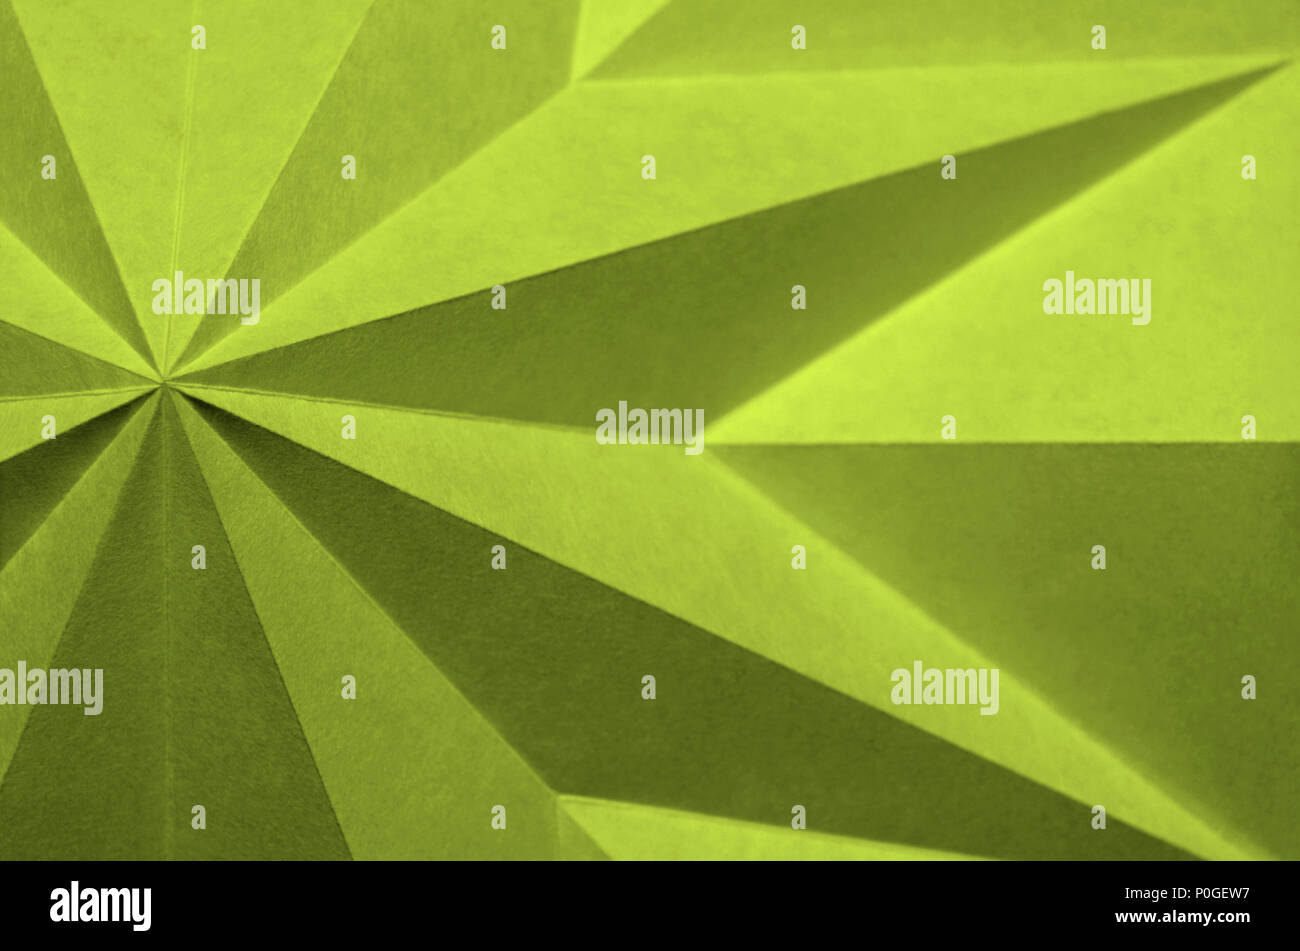 Lime Punch, Pantone 13-0550 . yellow green background abstract wallpaper. Origami; shallow focus, angular, monochrome folded paper. Stock Photo